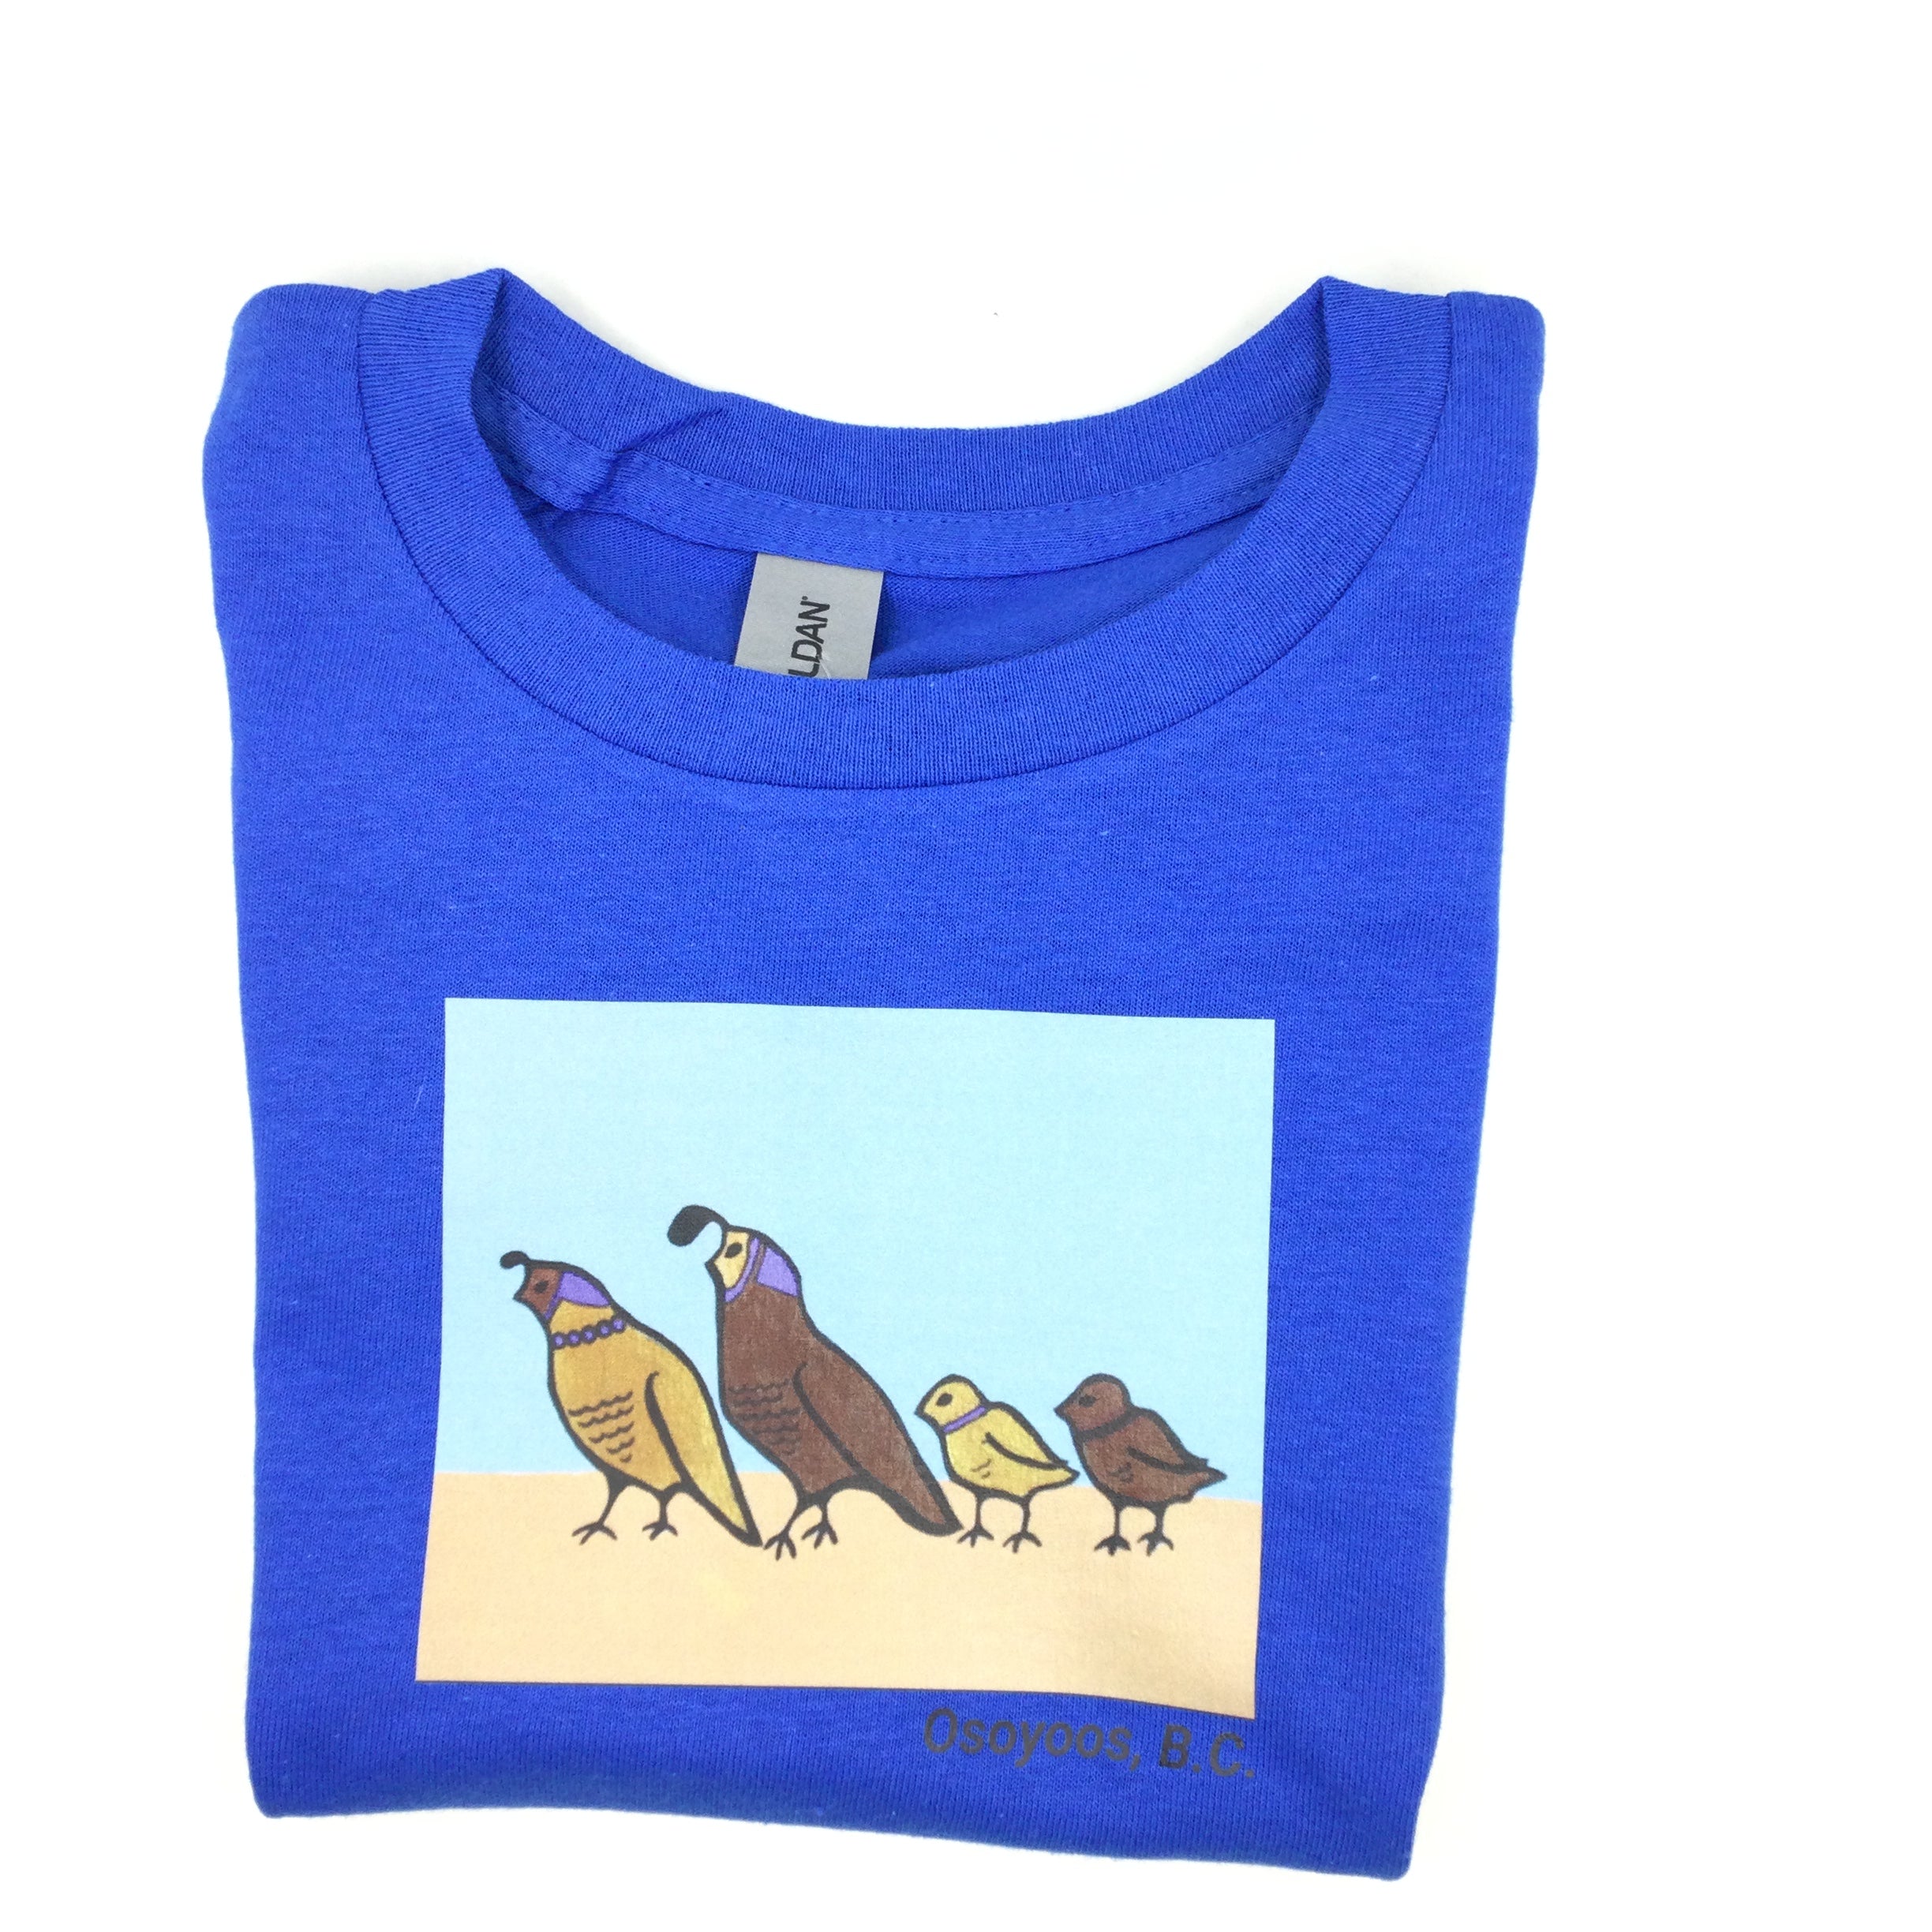 Toddler Tshirt with Quail Family